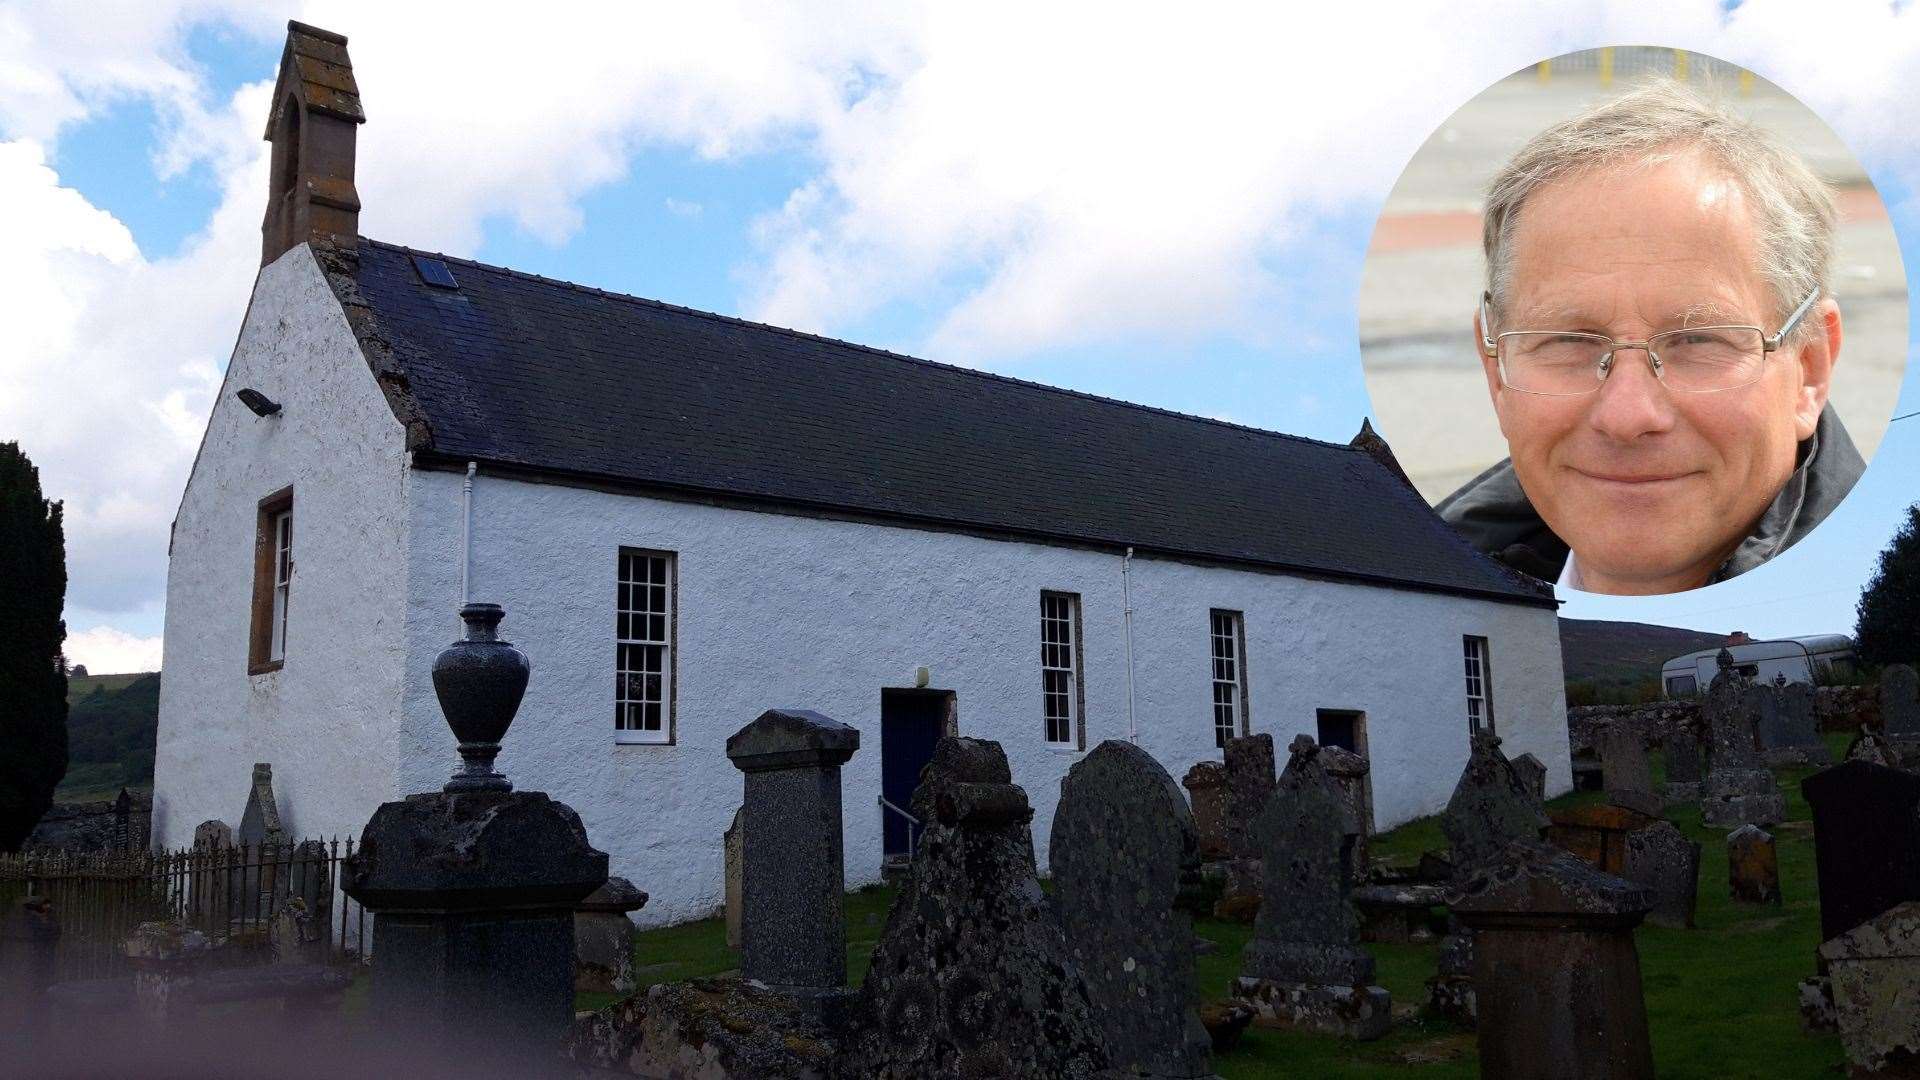 Frank Roach, inset, is setting up an SCIO to progress the community purchase of St Callan's.